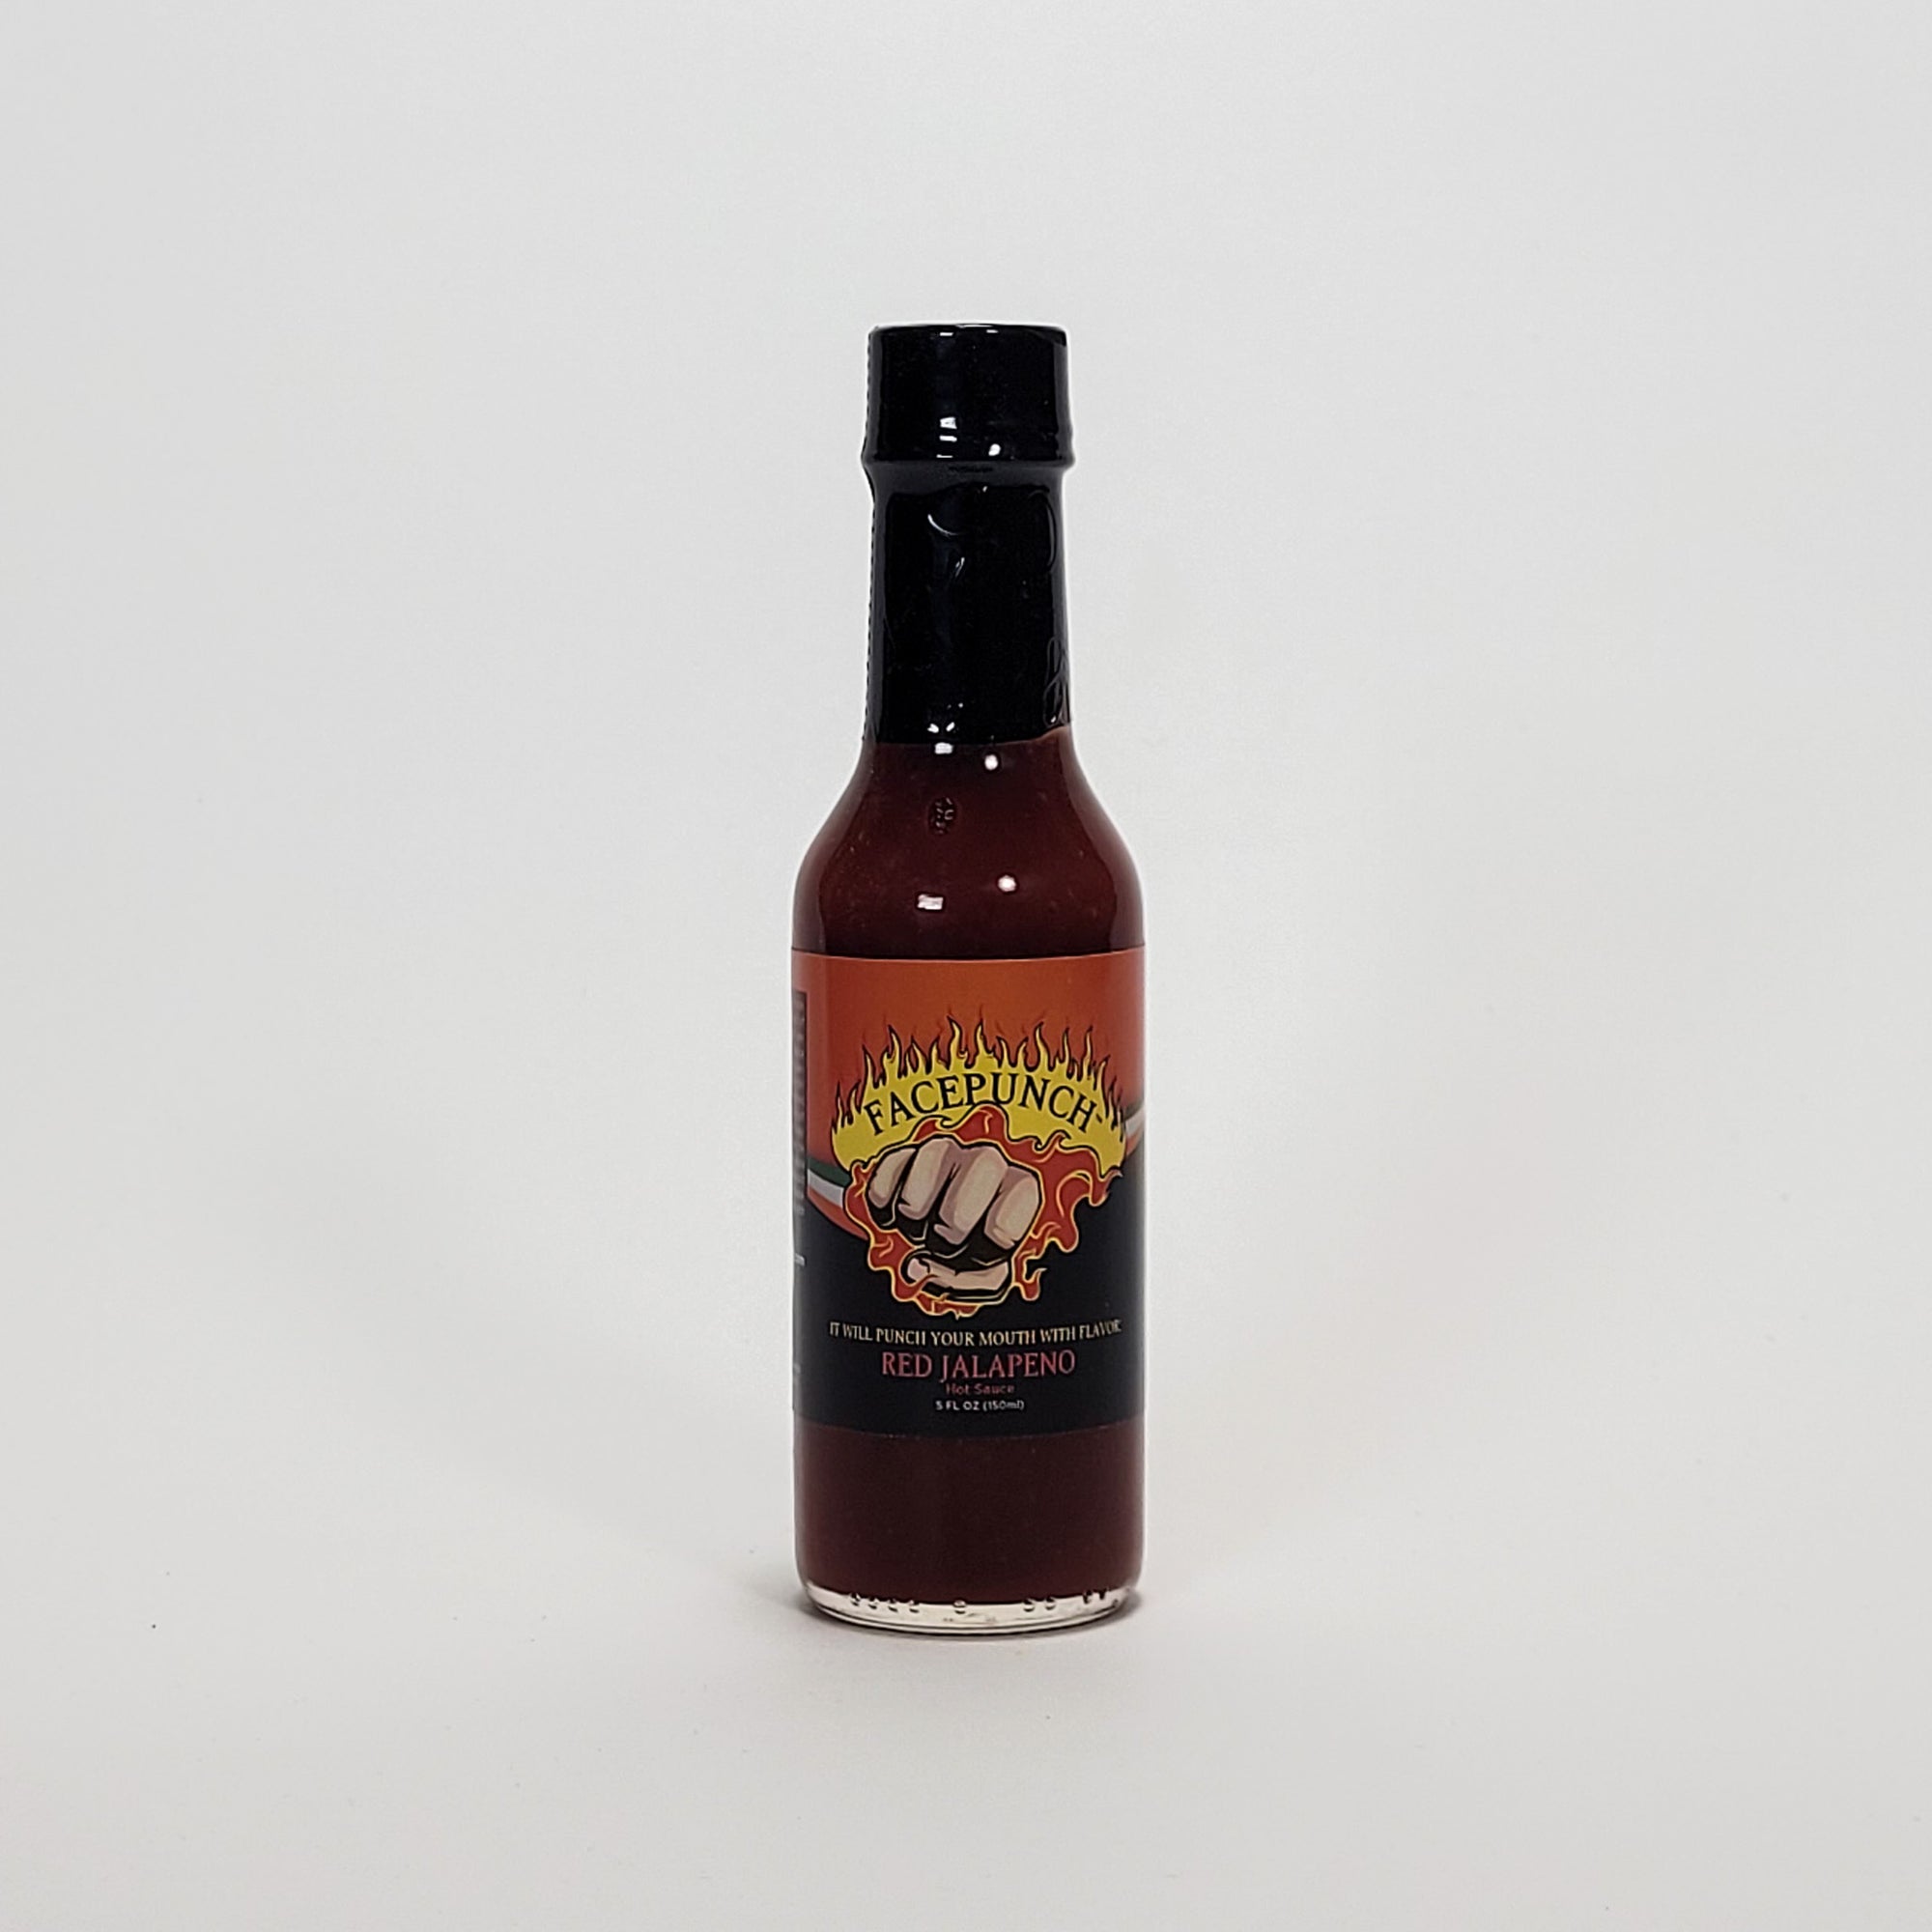 Facepunch Red jalapeno hot sauce